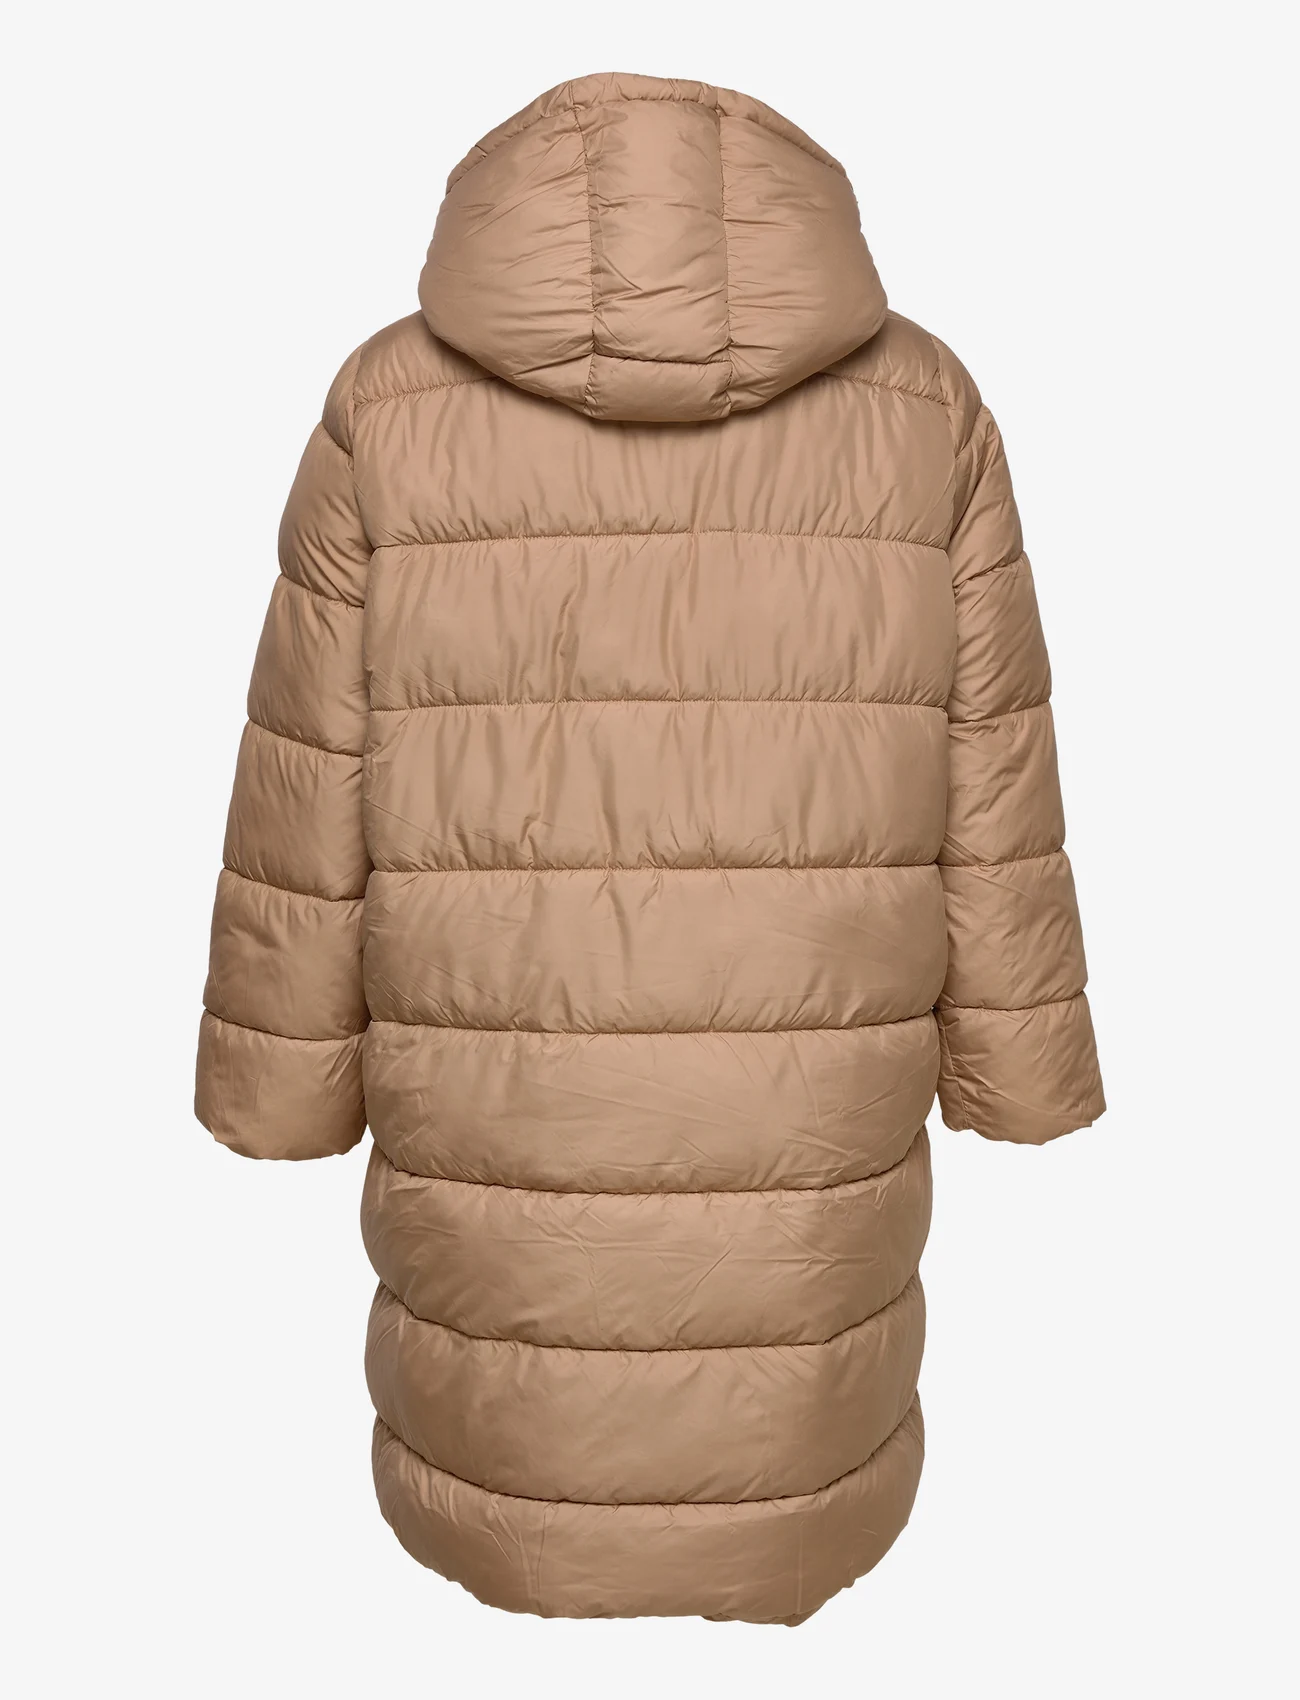 ONLY Carmakoma - CARCAMMIE LONG QUILTED COAT OTW - ziemas jakas - tigers eye - 1